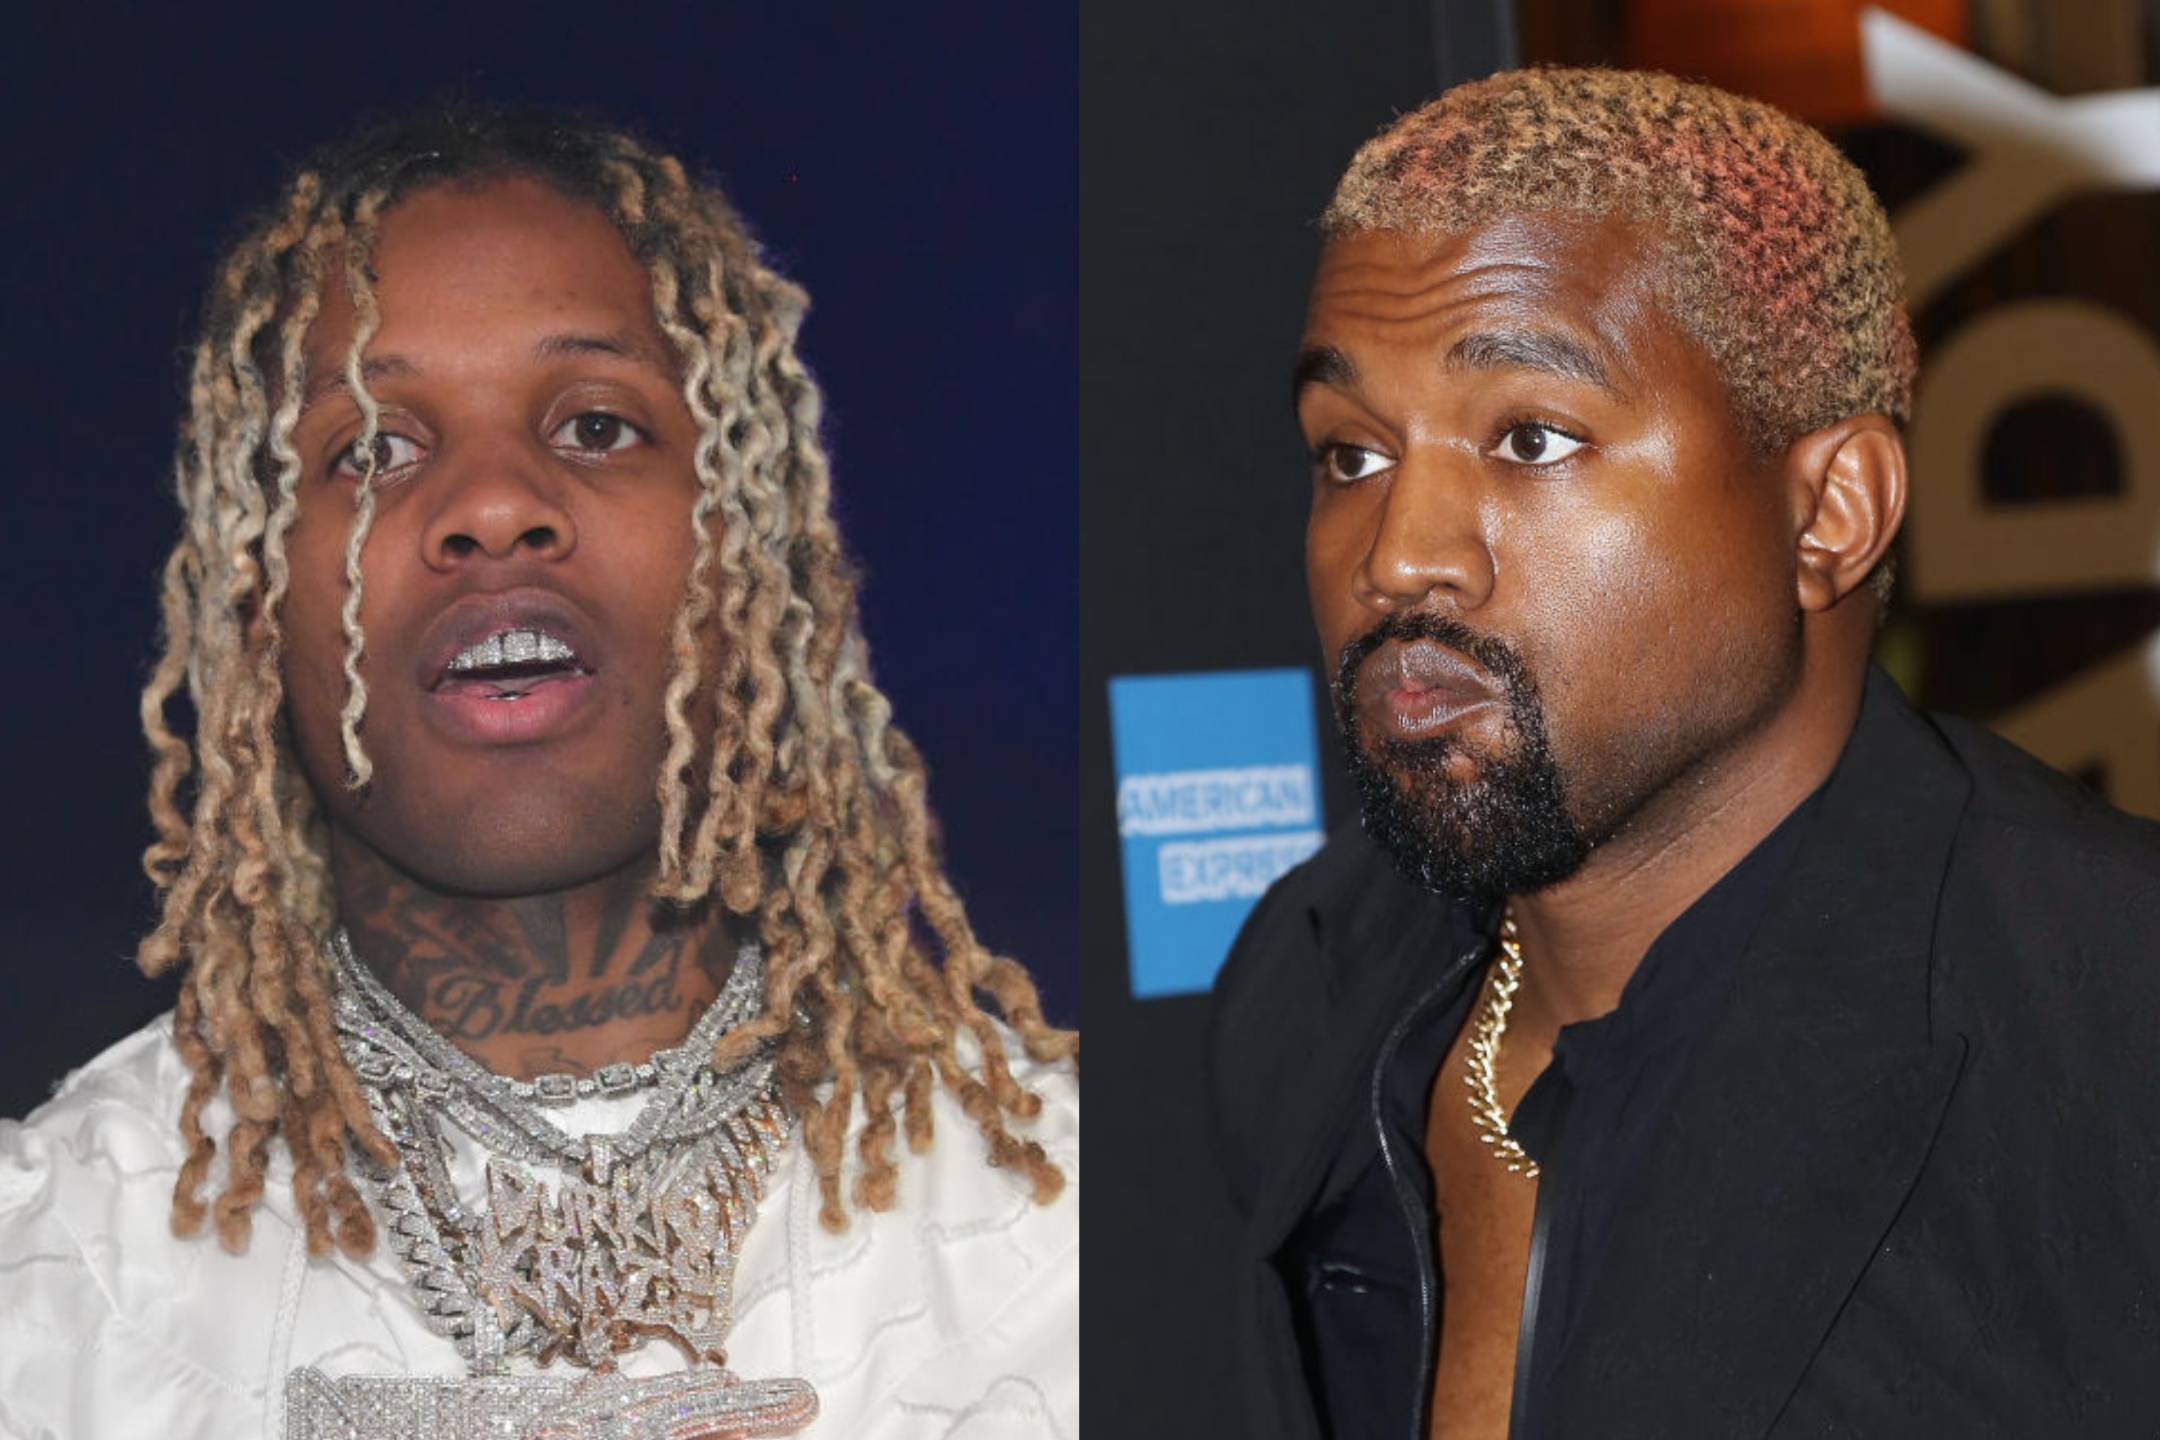 Lil Durk Says Kanye West Produced “Almost Healed” But He Won’t Release It